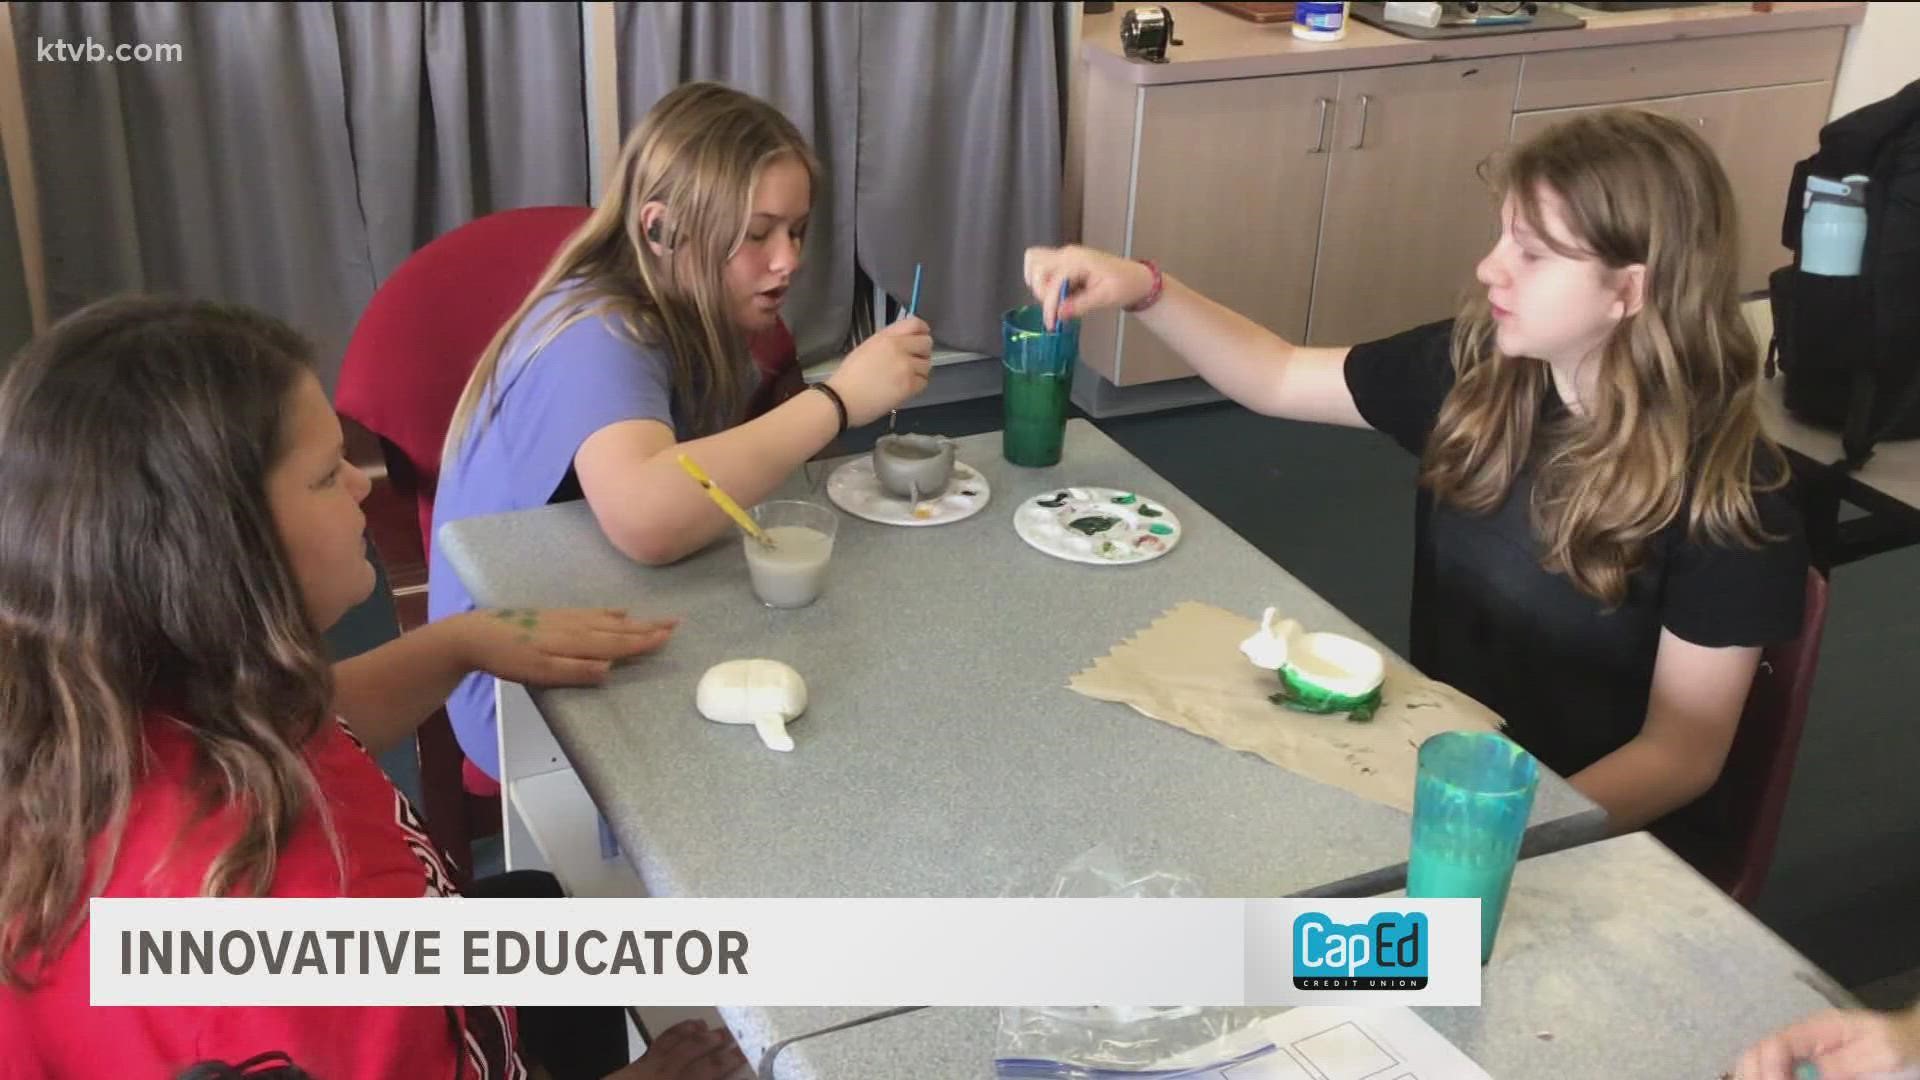 Two Nampa teachers featured this week foster creative thinking in and out of their non-traditional classrooms.